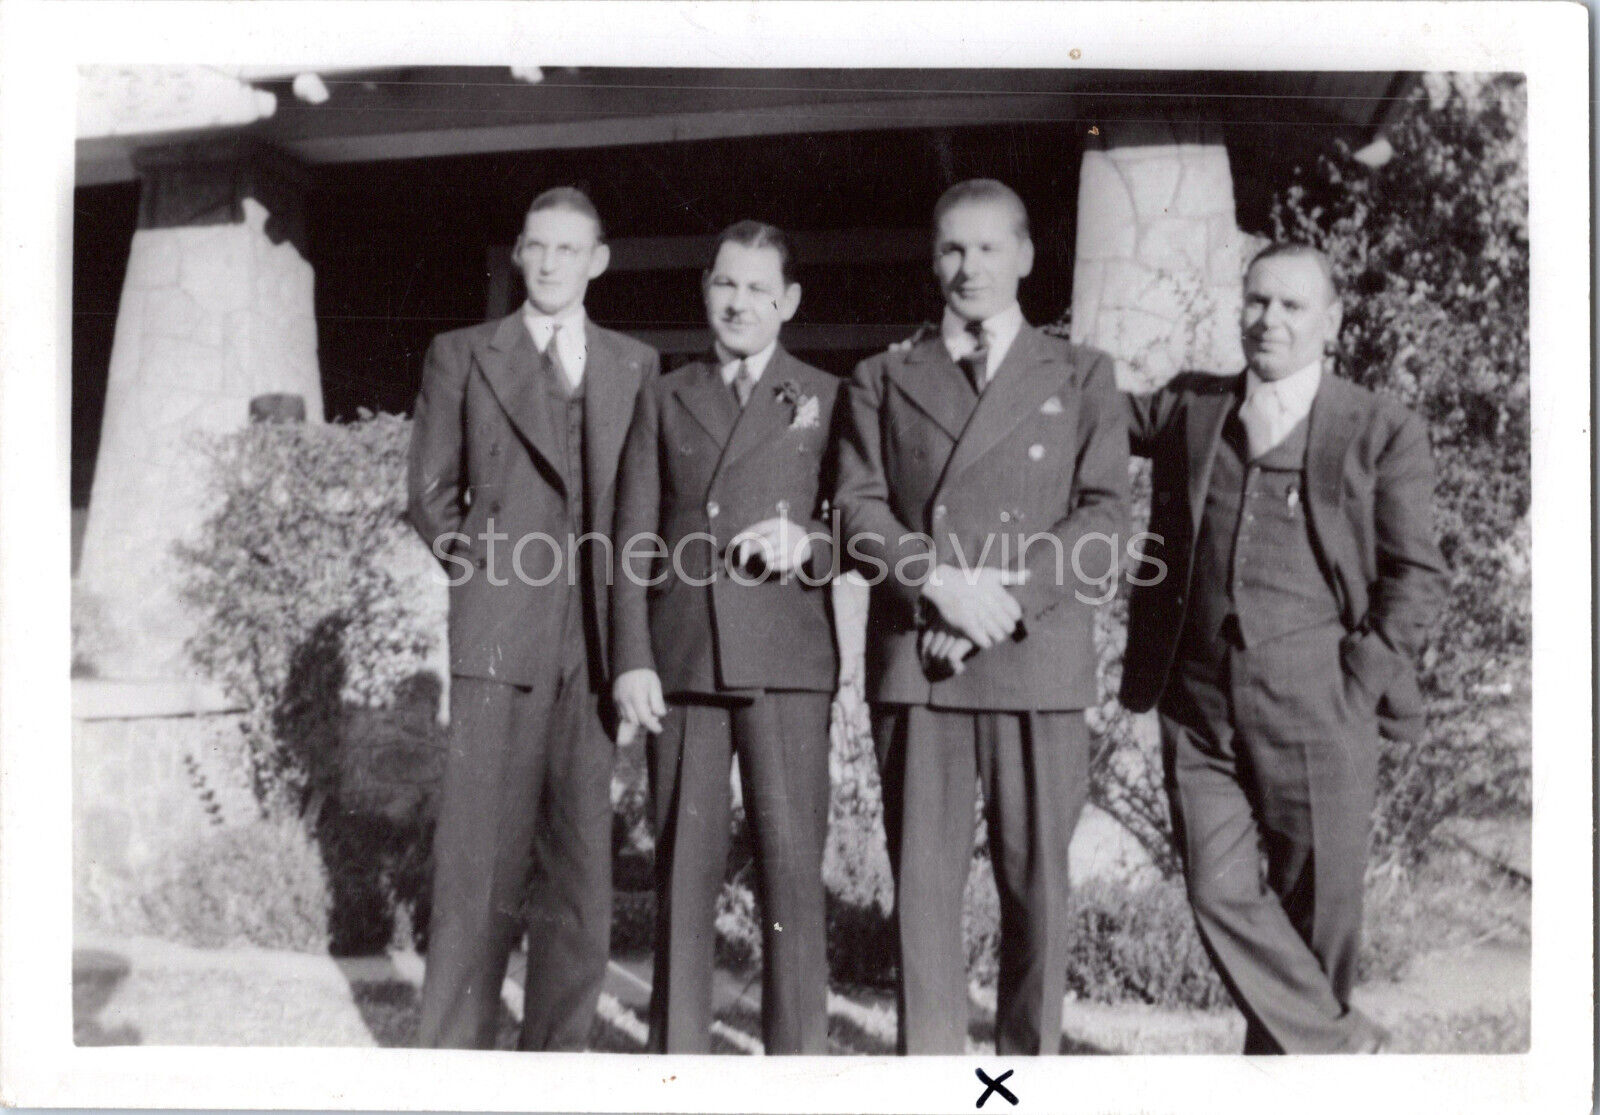 VTG B&W Found Photo - 40s 50s - Fancy Business Men Posing & Smoking In Suits